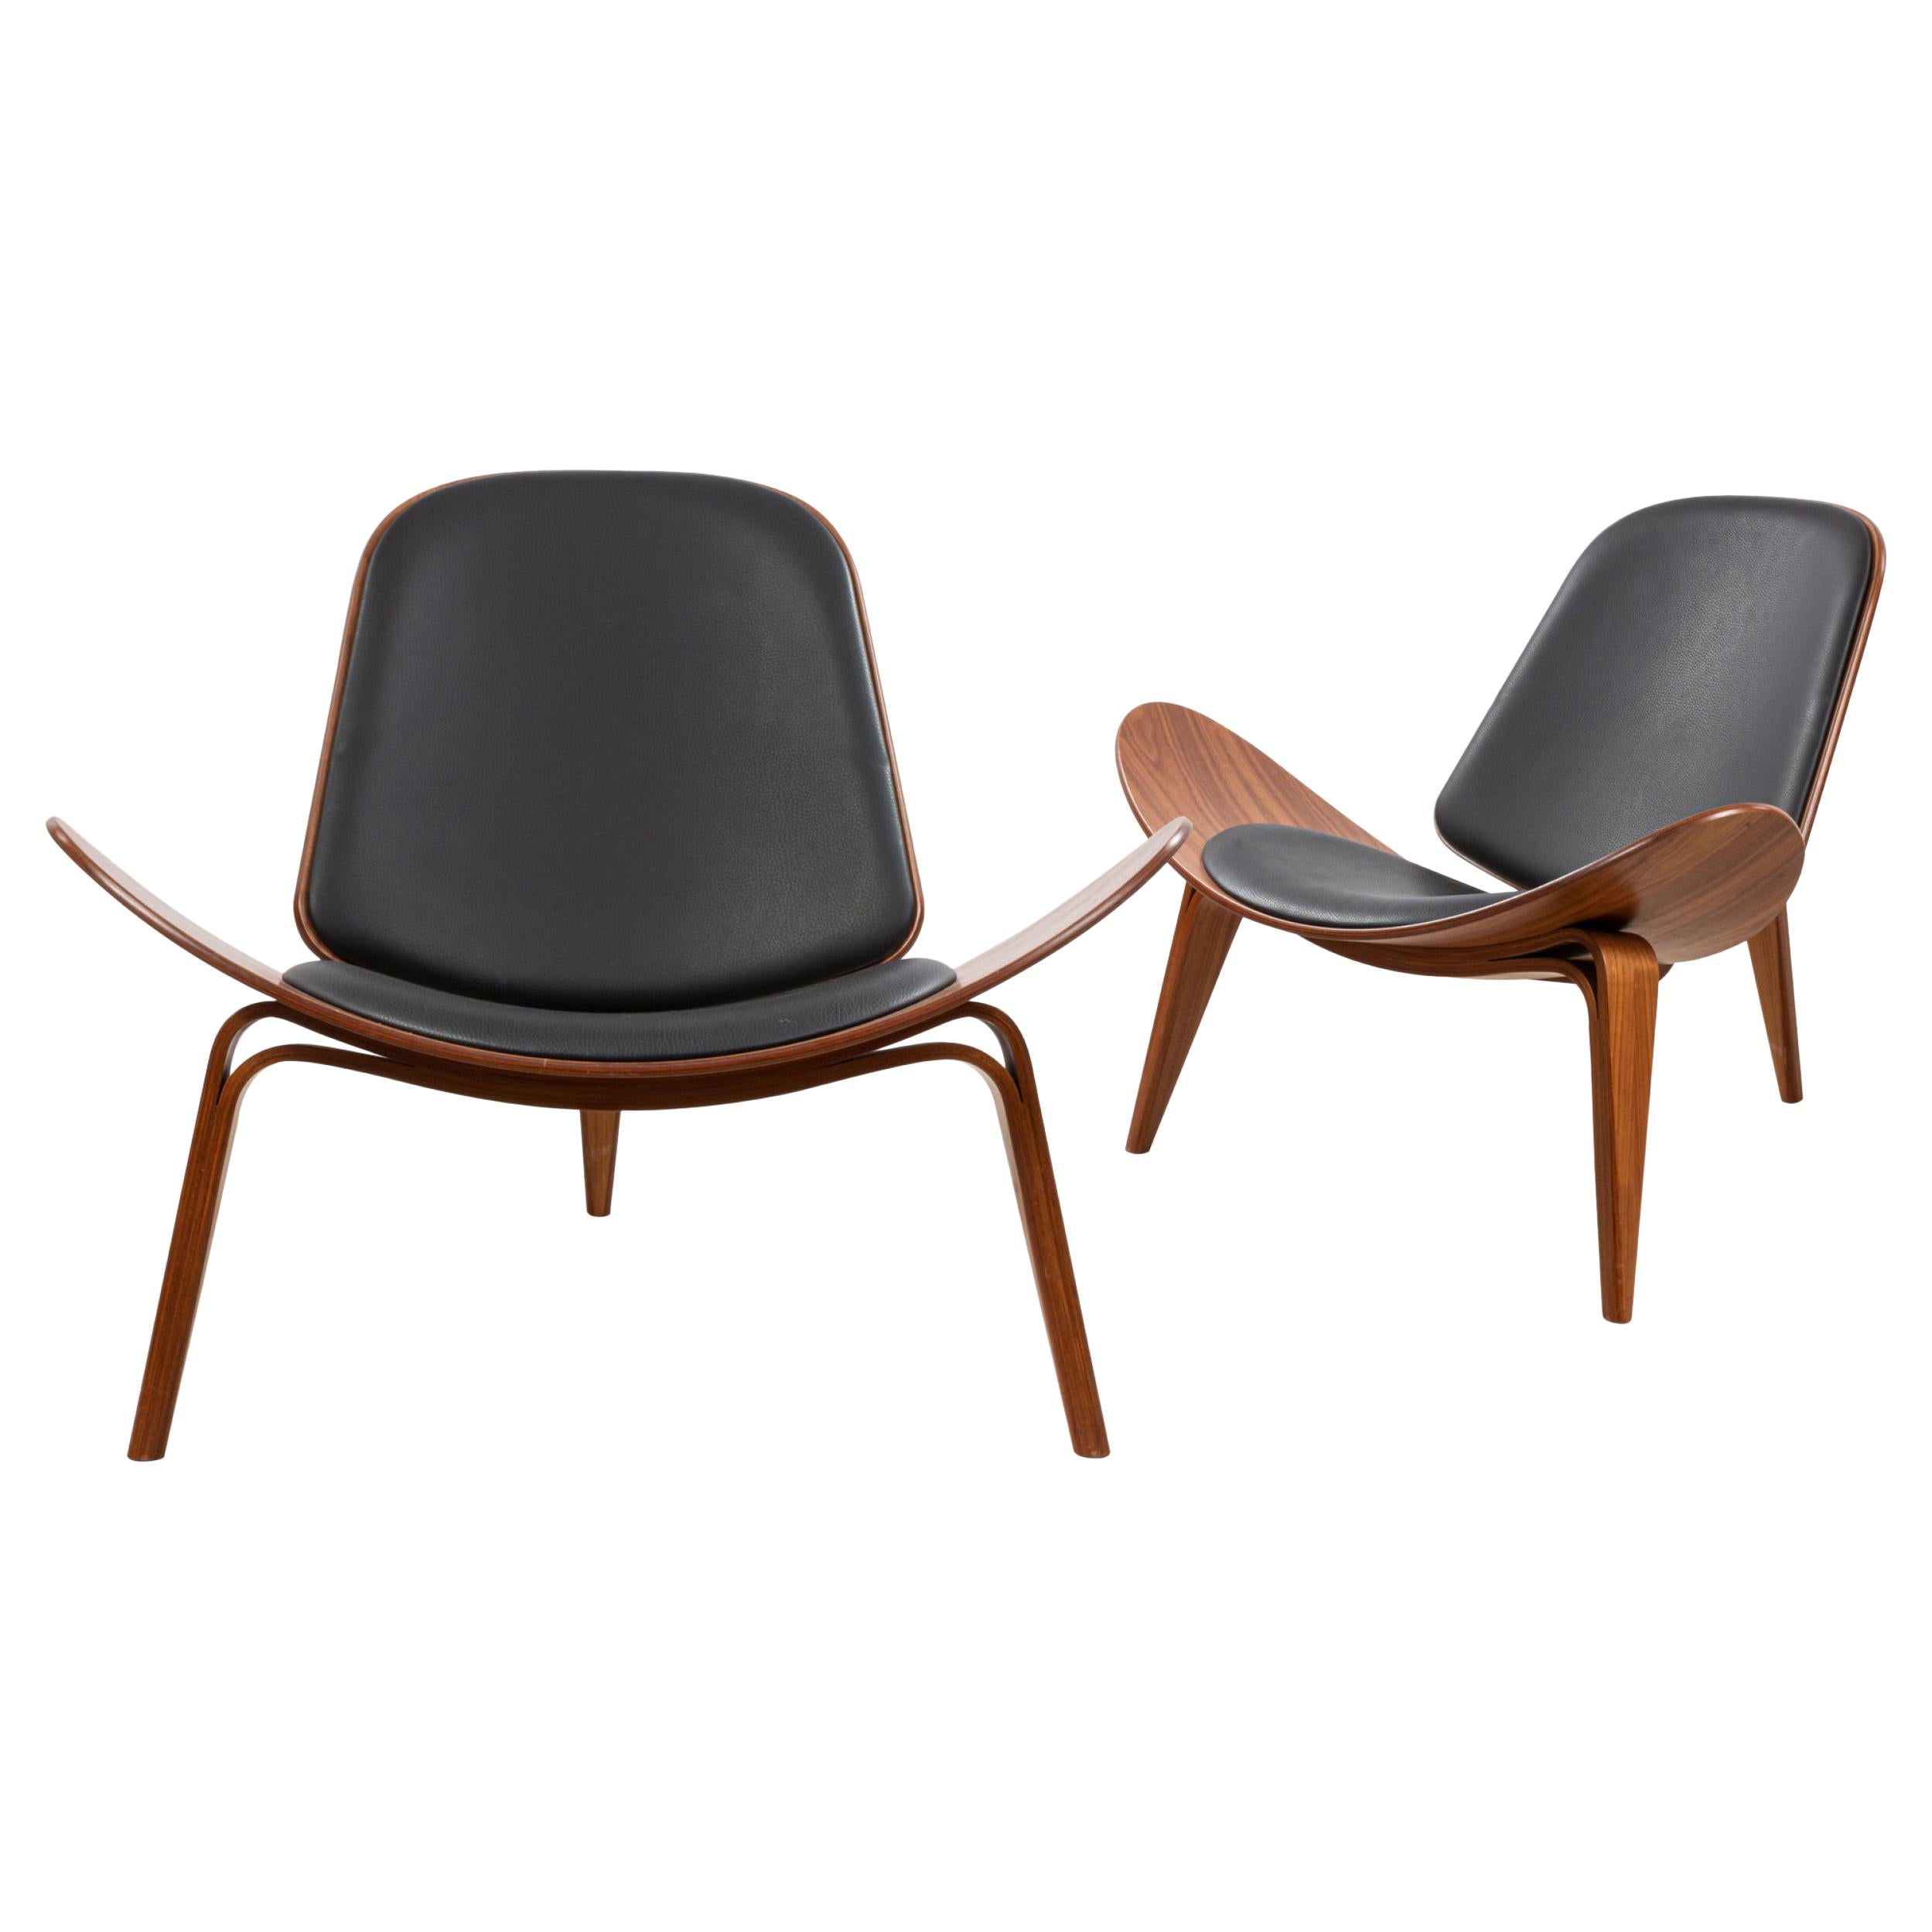 Pair of Hans Wegner for Carl Hansen & Søn Leather and Bentwood CH07 Shell Chairs